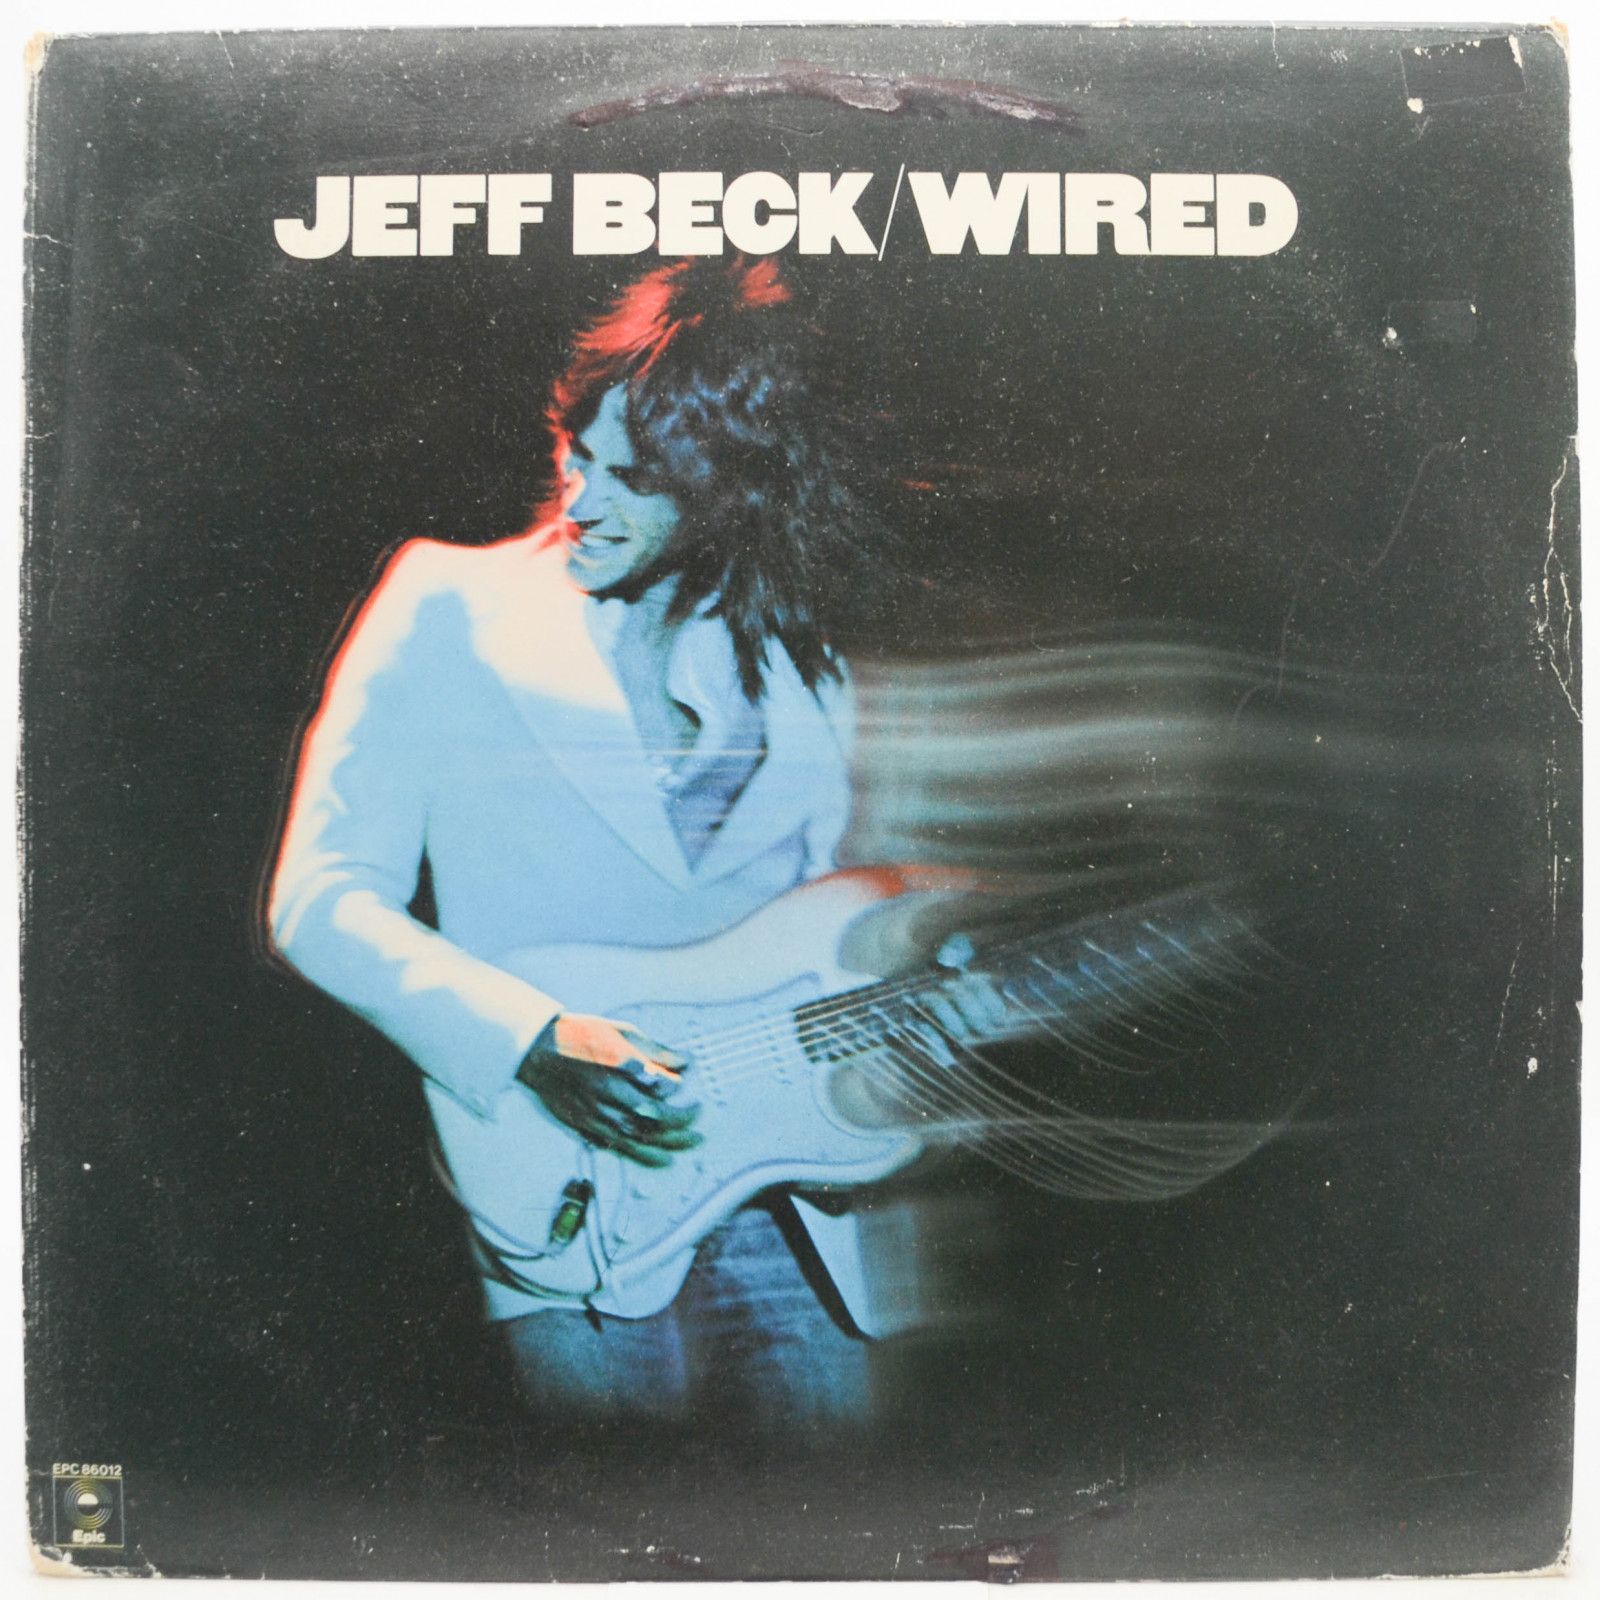 Jeff Beck — Wired, 1976